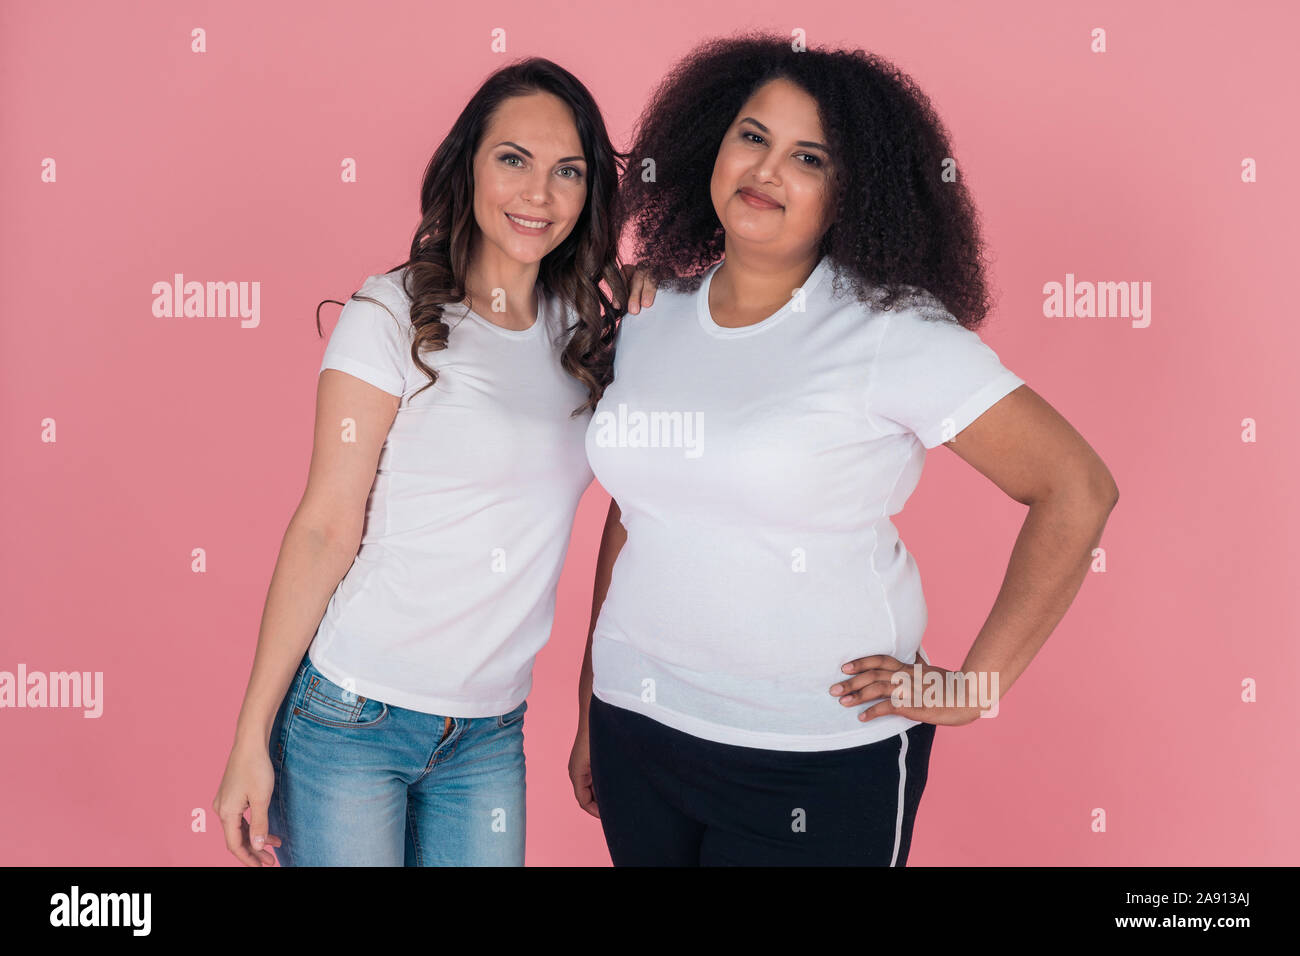 Two cute girls an African American and a Caucasian girl smile directly at the camera in white t shirts on a pink background Stock Photo